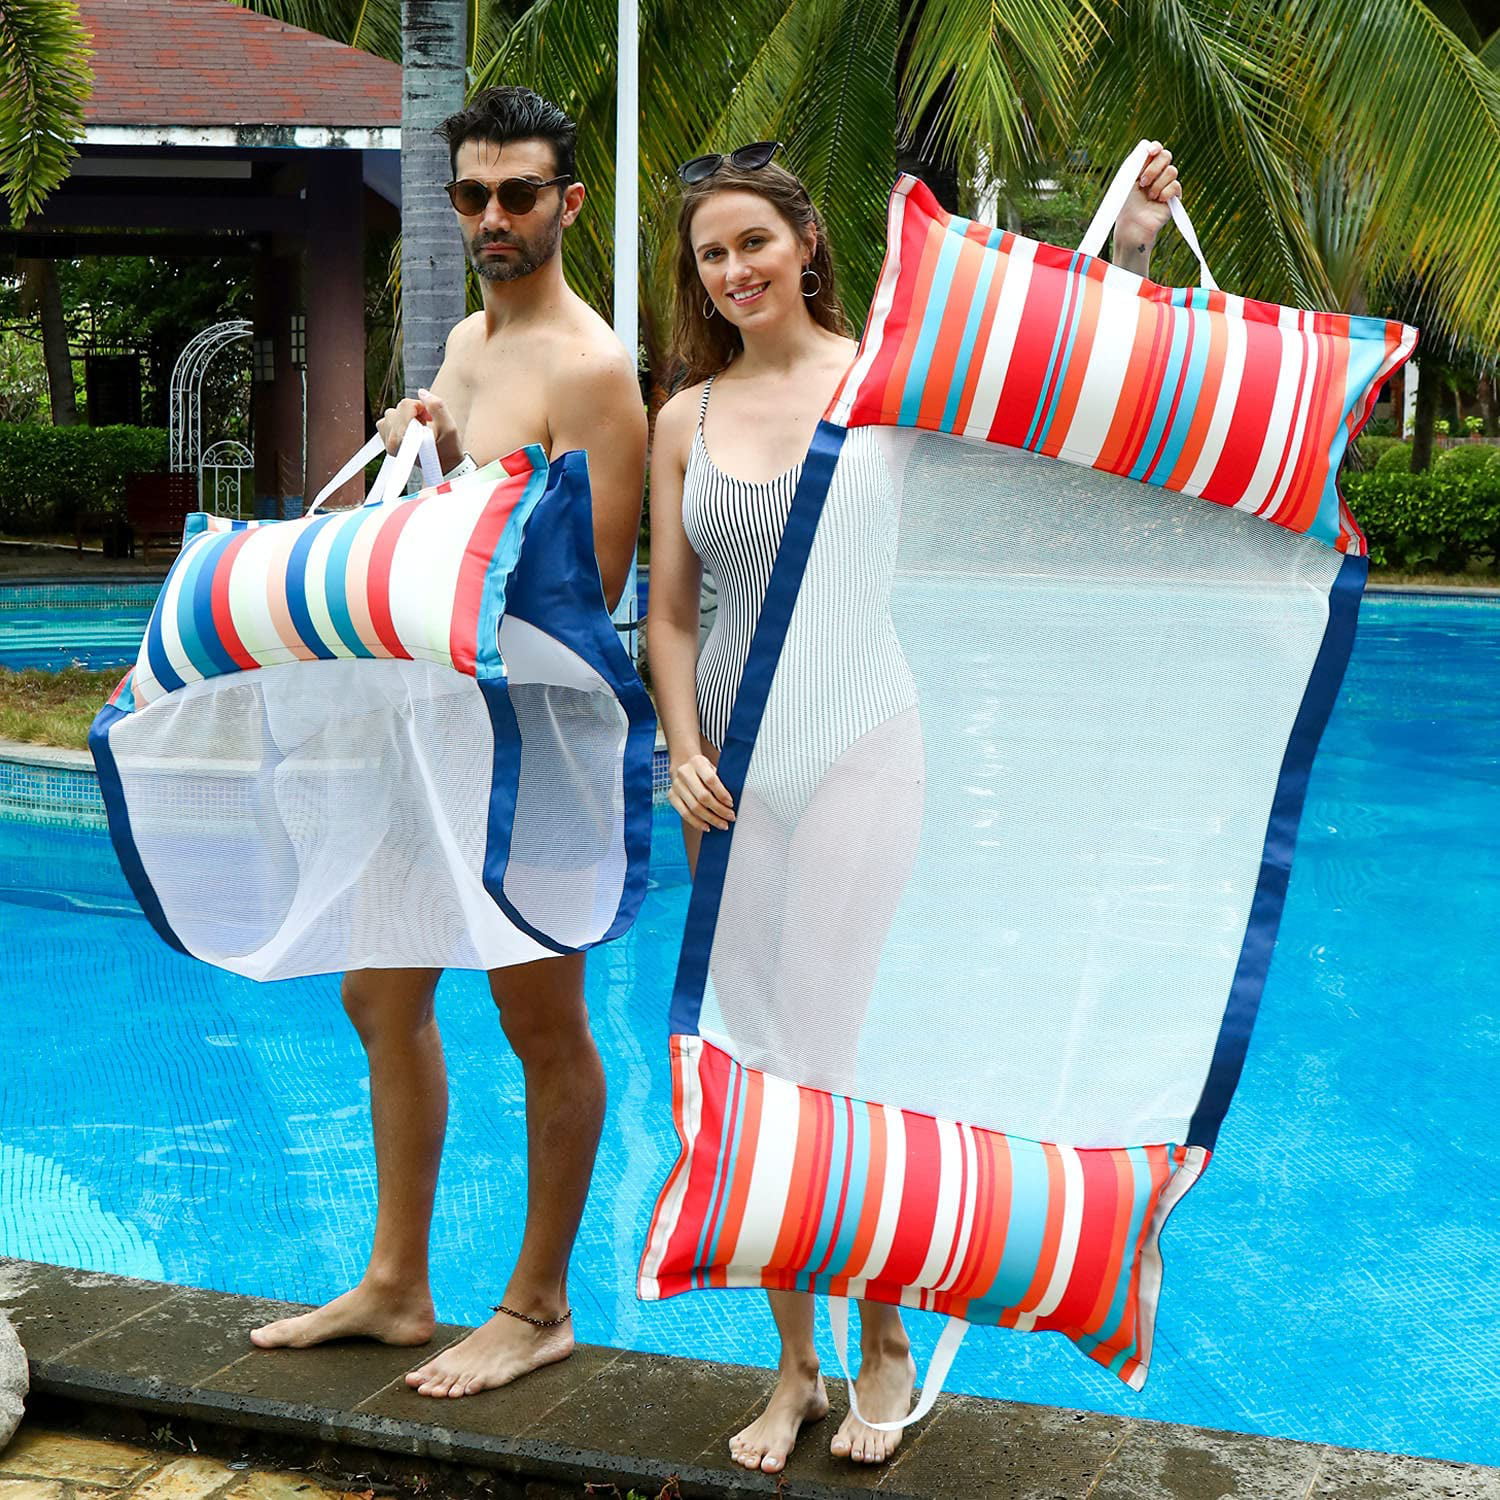 XL Pool Float Lounger for Adults… FindUWill Fabric Pool Hammock Floats Saddle, Lounge Chair, Hammock, Drifter 2Pack Inflatable Water Hammocks Floaties 4-in-1 